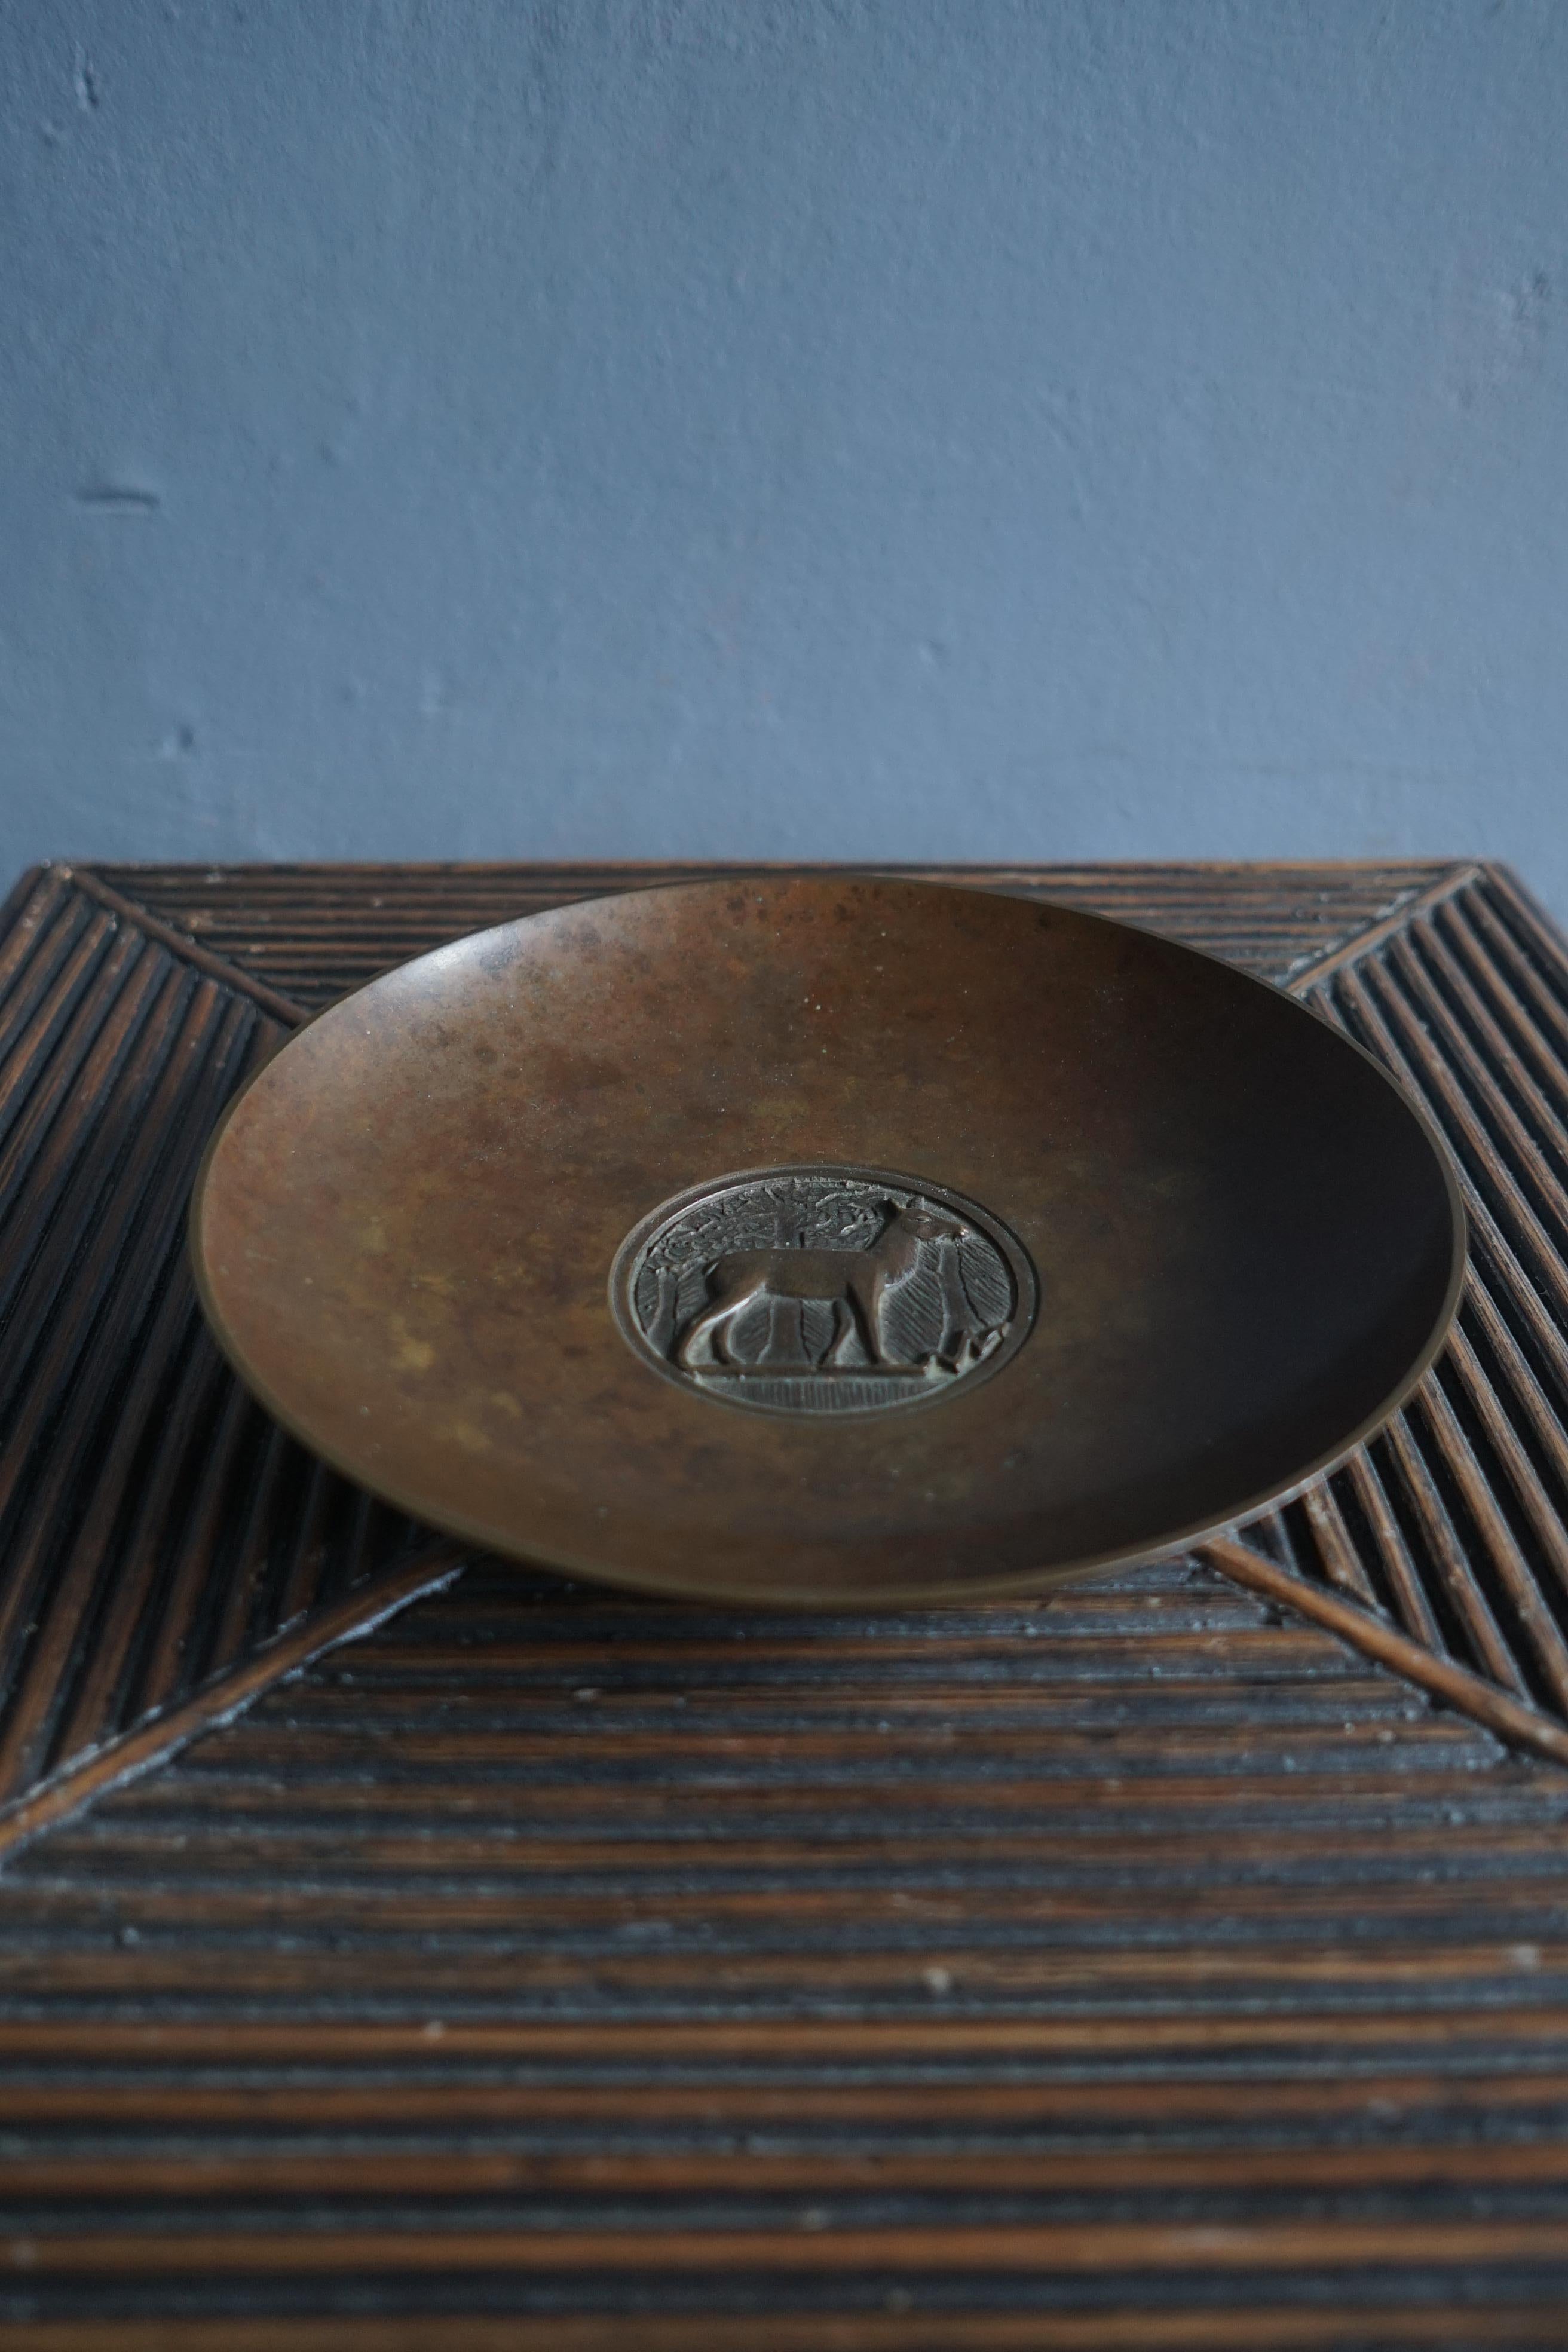 Bronze Art deco dish/charger by Danish artist Evan Jensen from the 1930's in a beautiful original condition, the dish is signed Evan Jensen Copenhagen Bronze and has model number 320.

The dish has a very decorative image of a deer on the